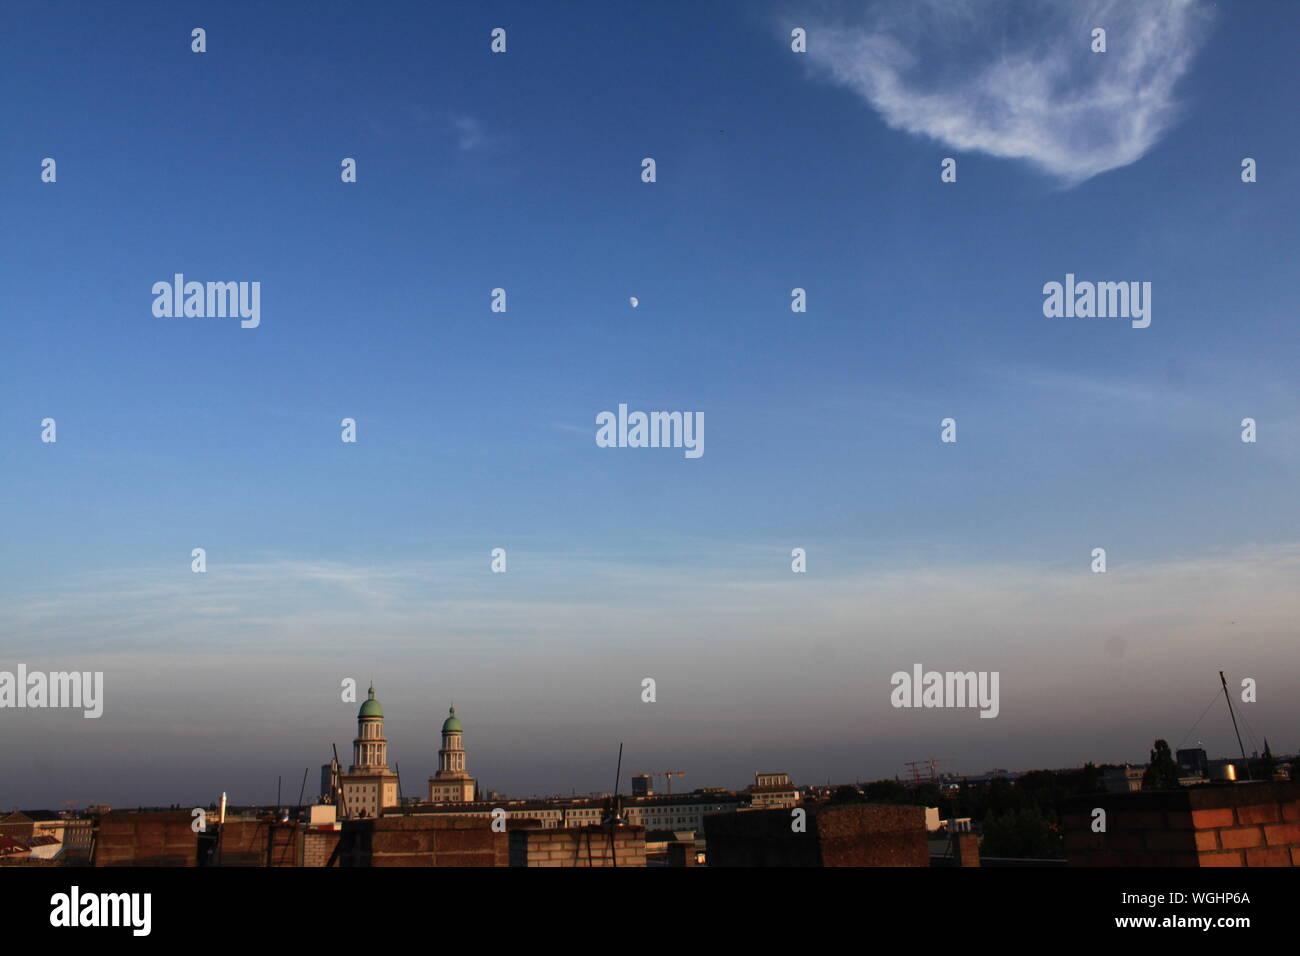 Distance View Of Frankfurter Tor Against Sky During Sunset Stock Photo